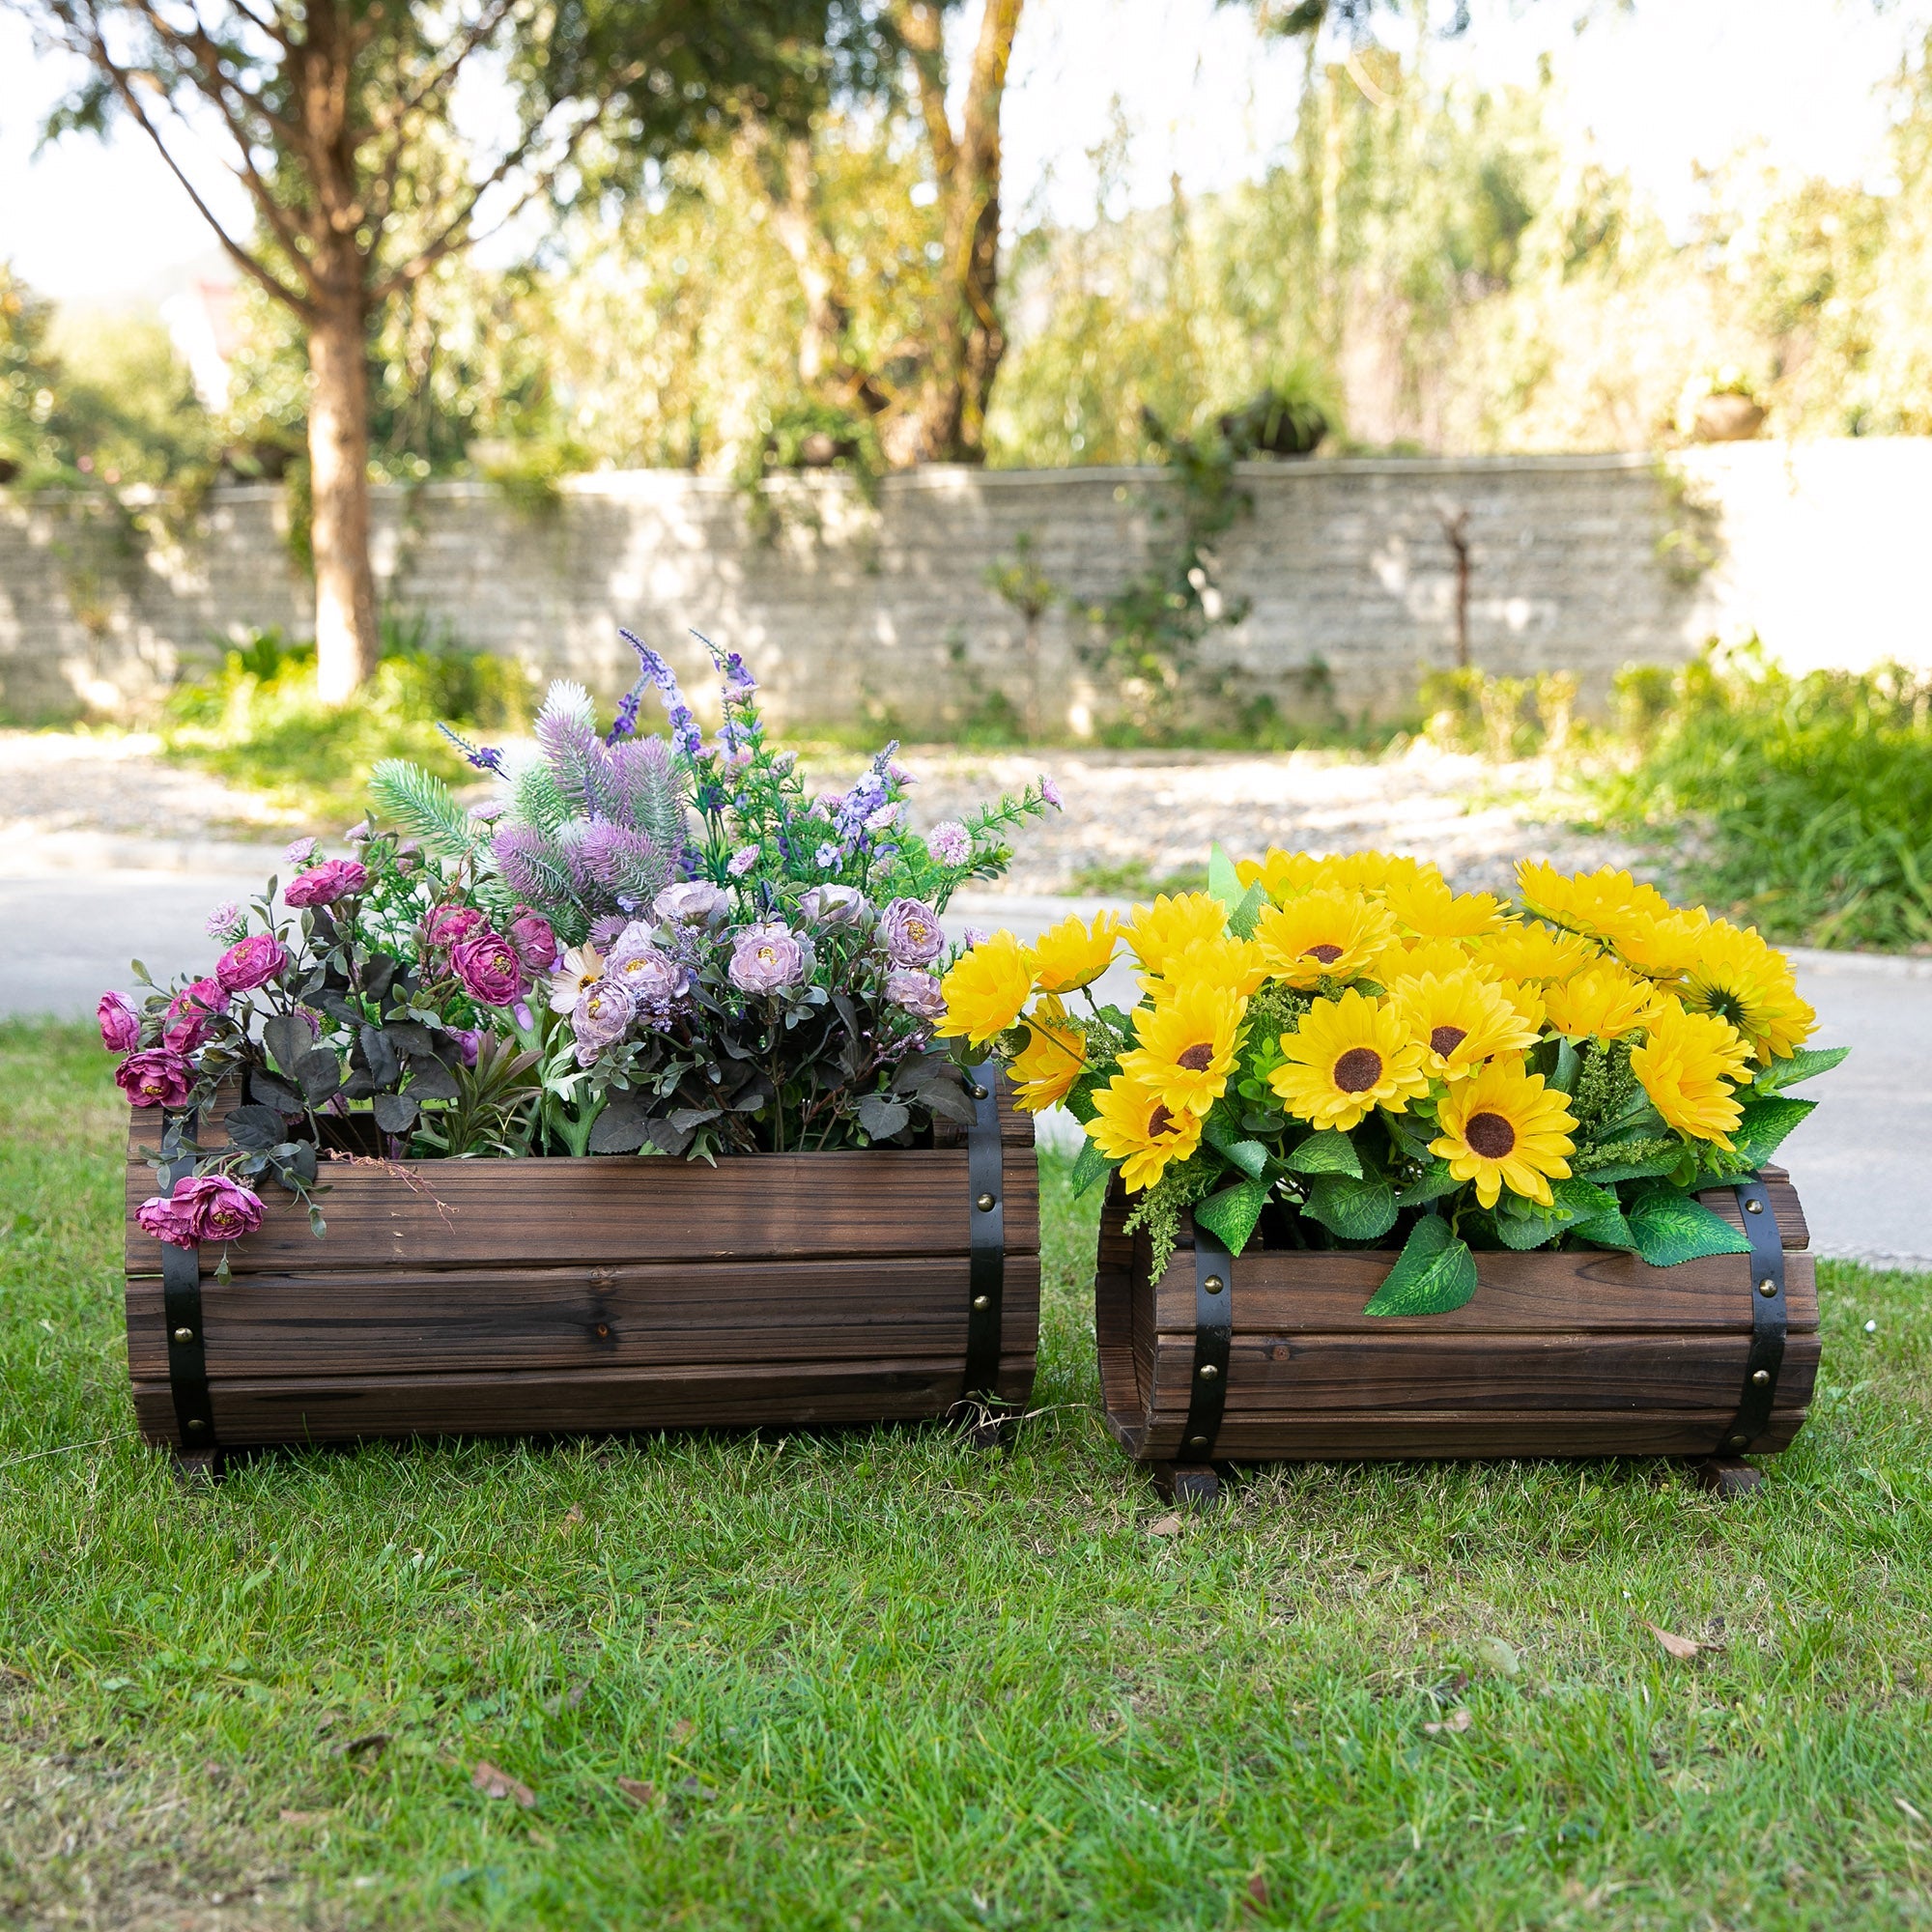 2PCs Wooden Planter Box Flower Plant Pot Outdoor & Indoor Flower Beds Plant Box with Solid Wood Carbonized Colour-1